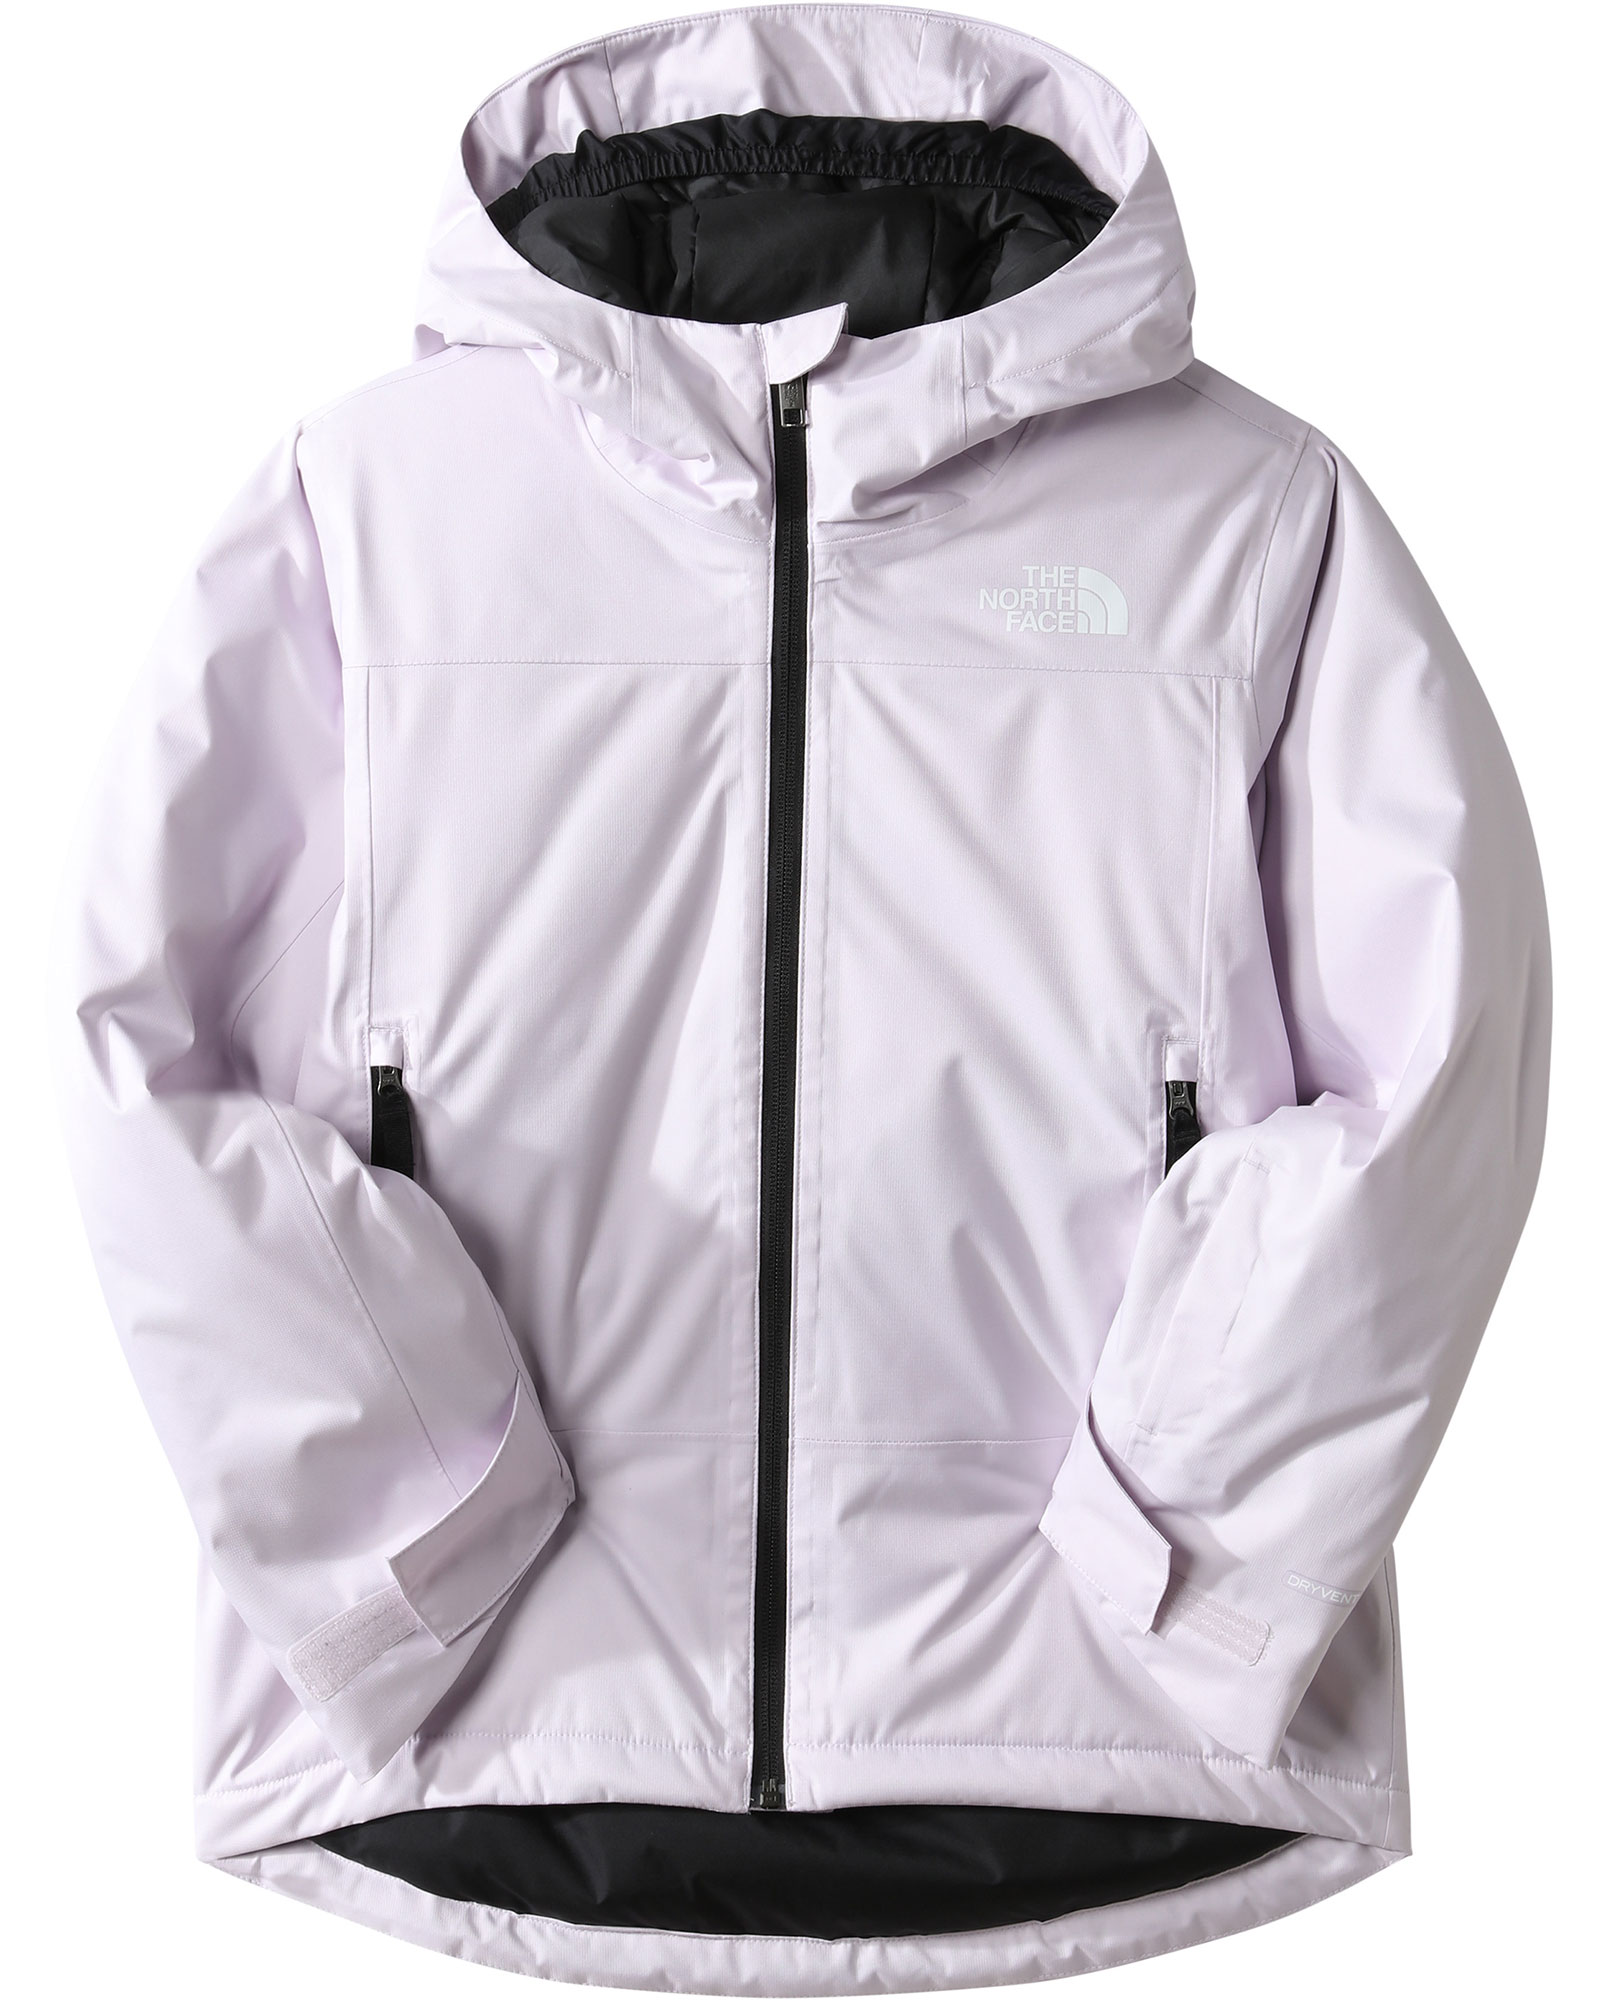 The North Face Freedom Kids’ Insulated Jacket - Lavender Fog M